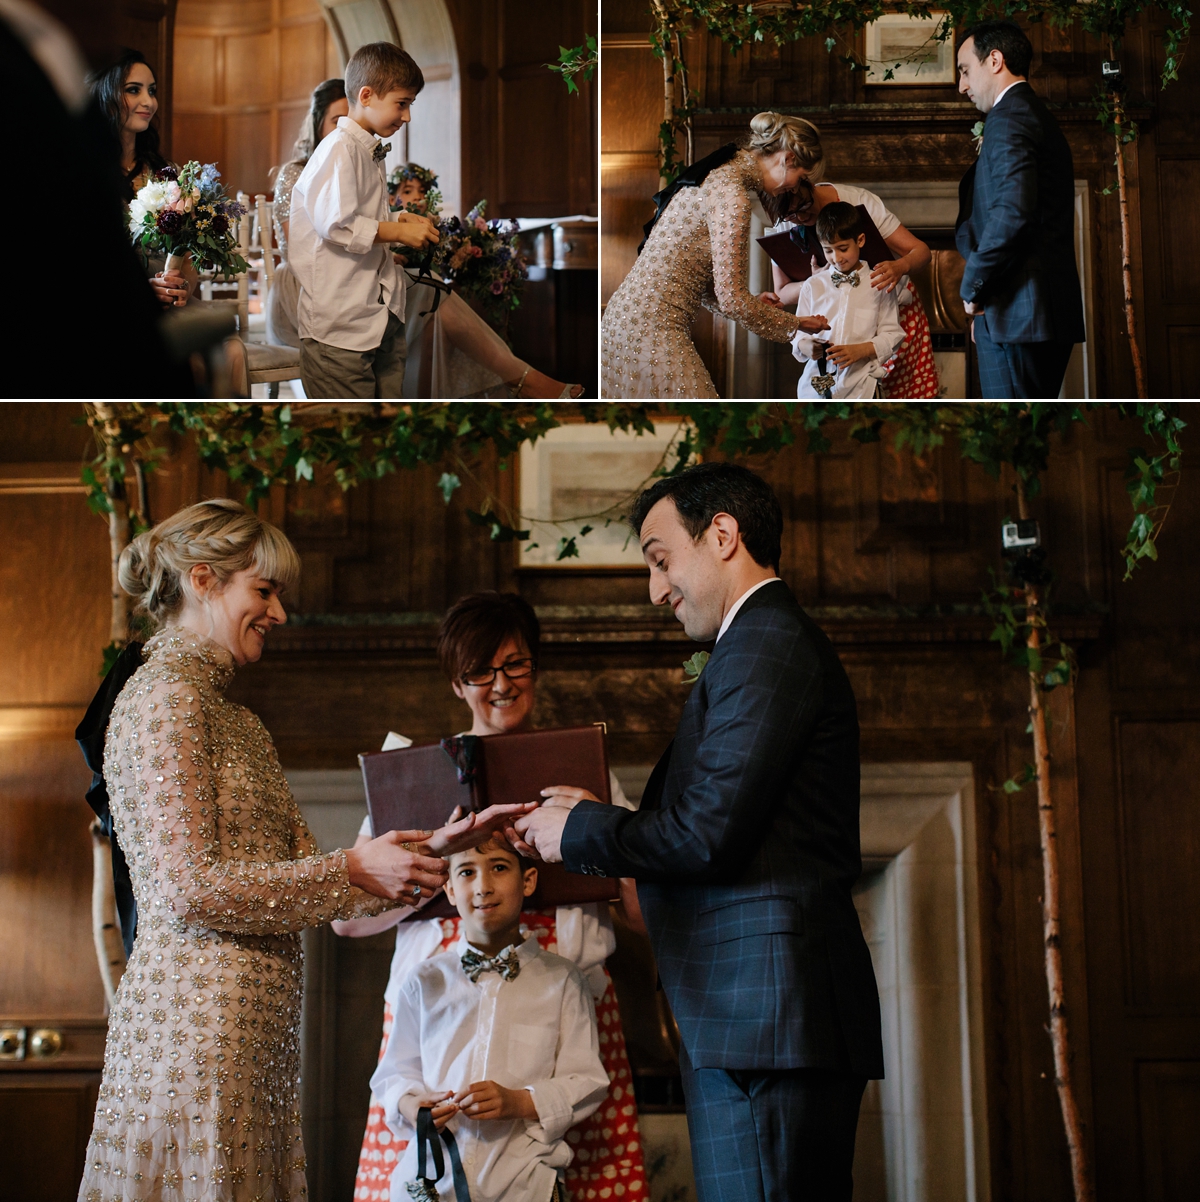 A bride in a gold, embellished Temperley London dress for her wedding at Rowallan Castle in Scotland. Images by Caro Weiss.